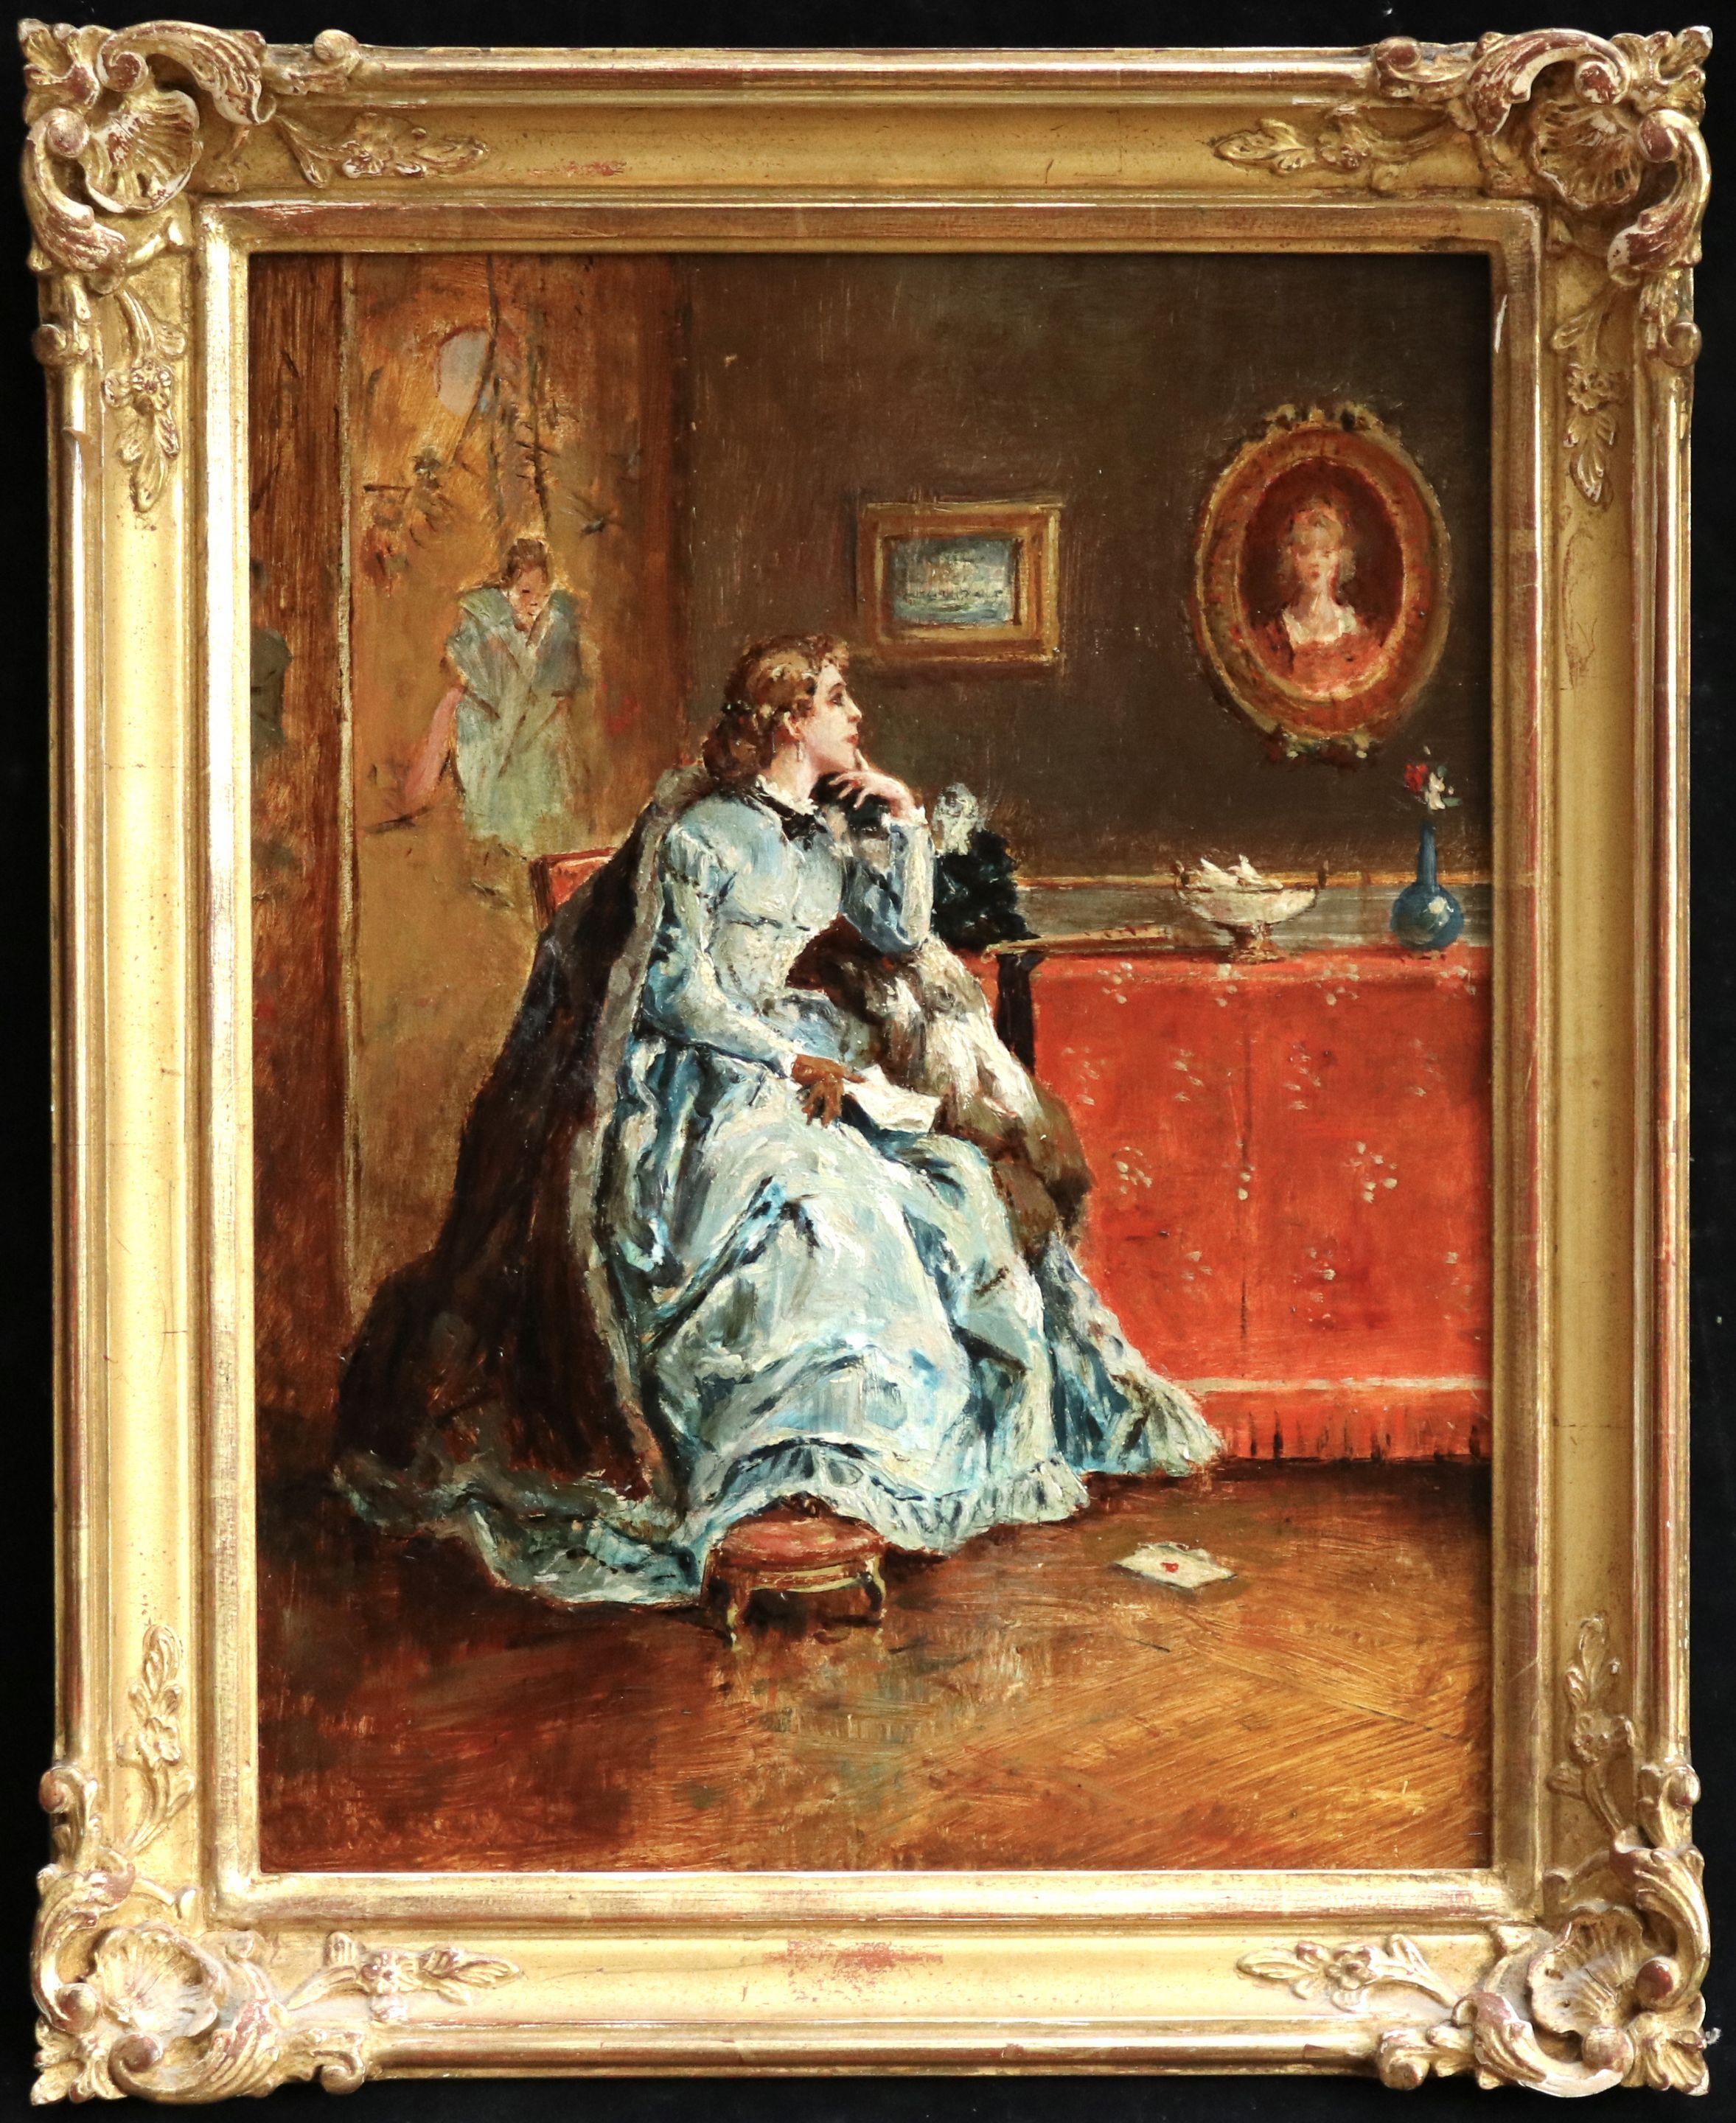 Portrait of Sarah Bernhardt - 19th Century Oil, Figure in Interior by A Stevens - Painting by Alfred Émile Léopold Stevens